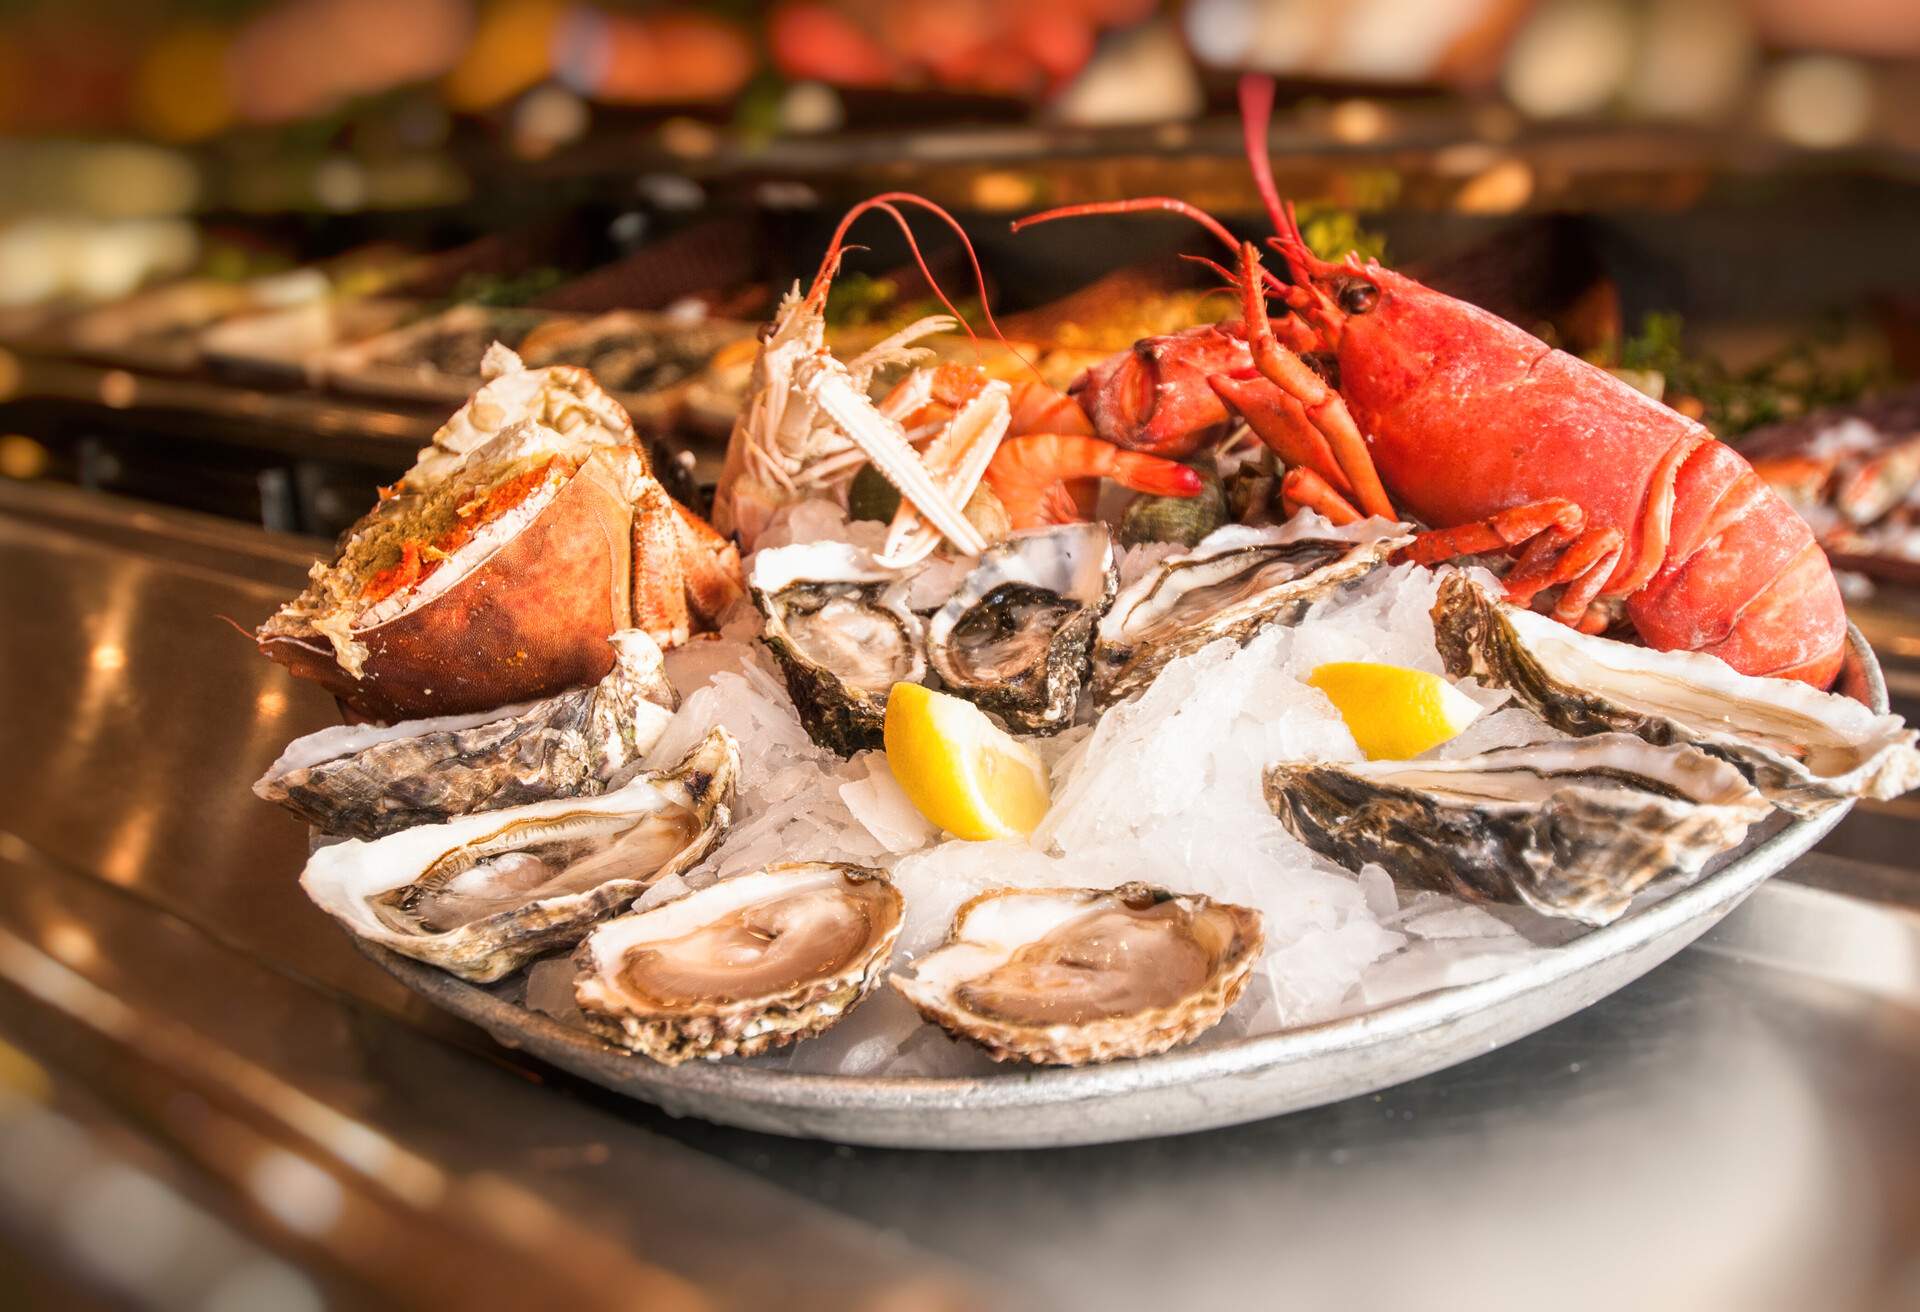 A fresh seafood platter with oysters, crabs, prawns, and lobsters.